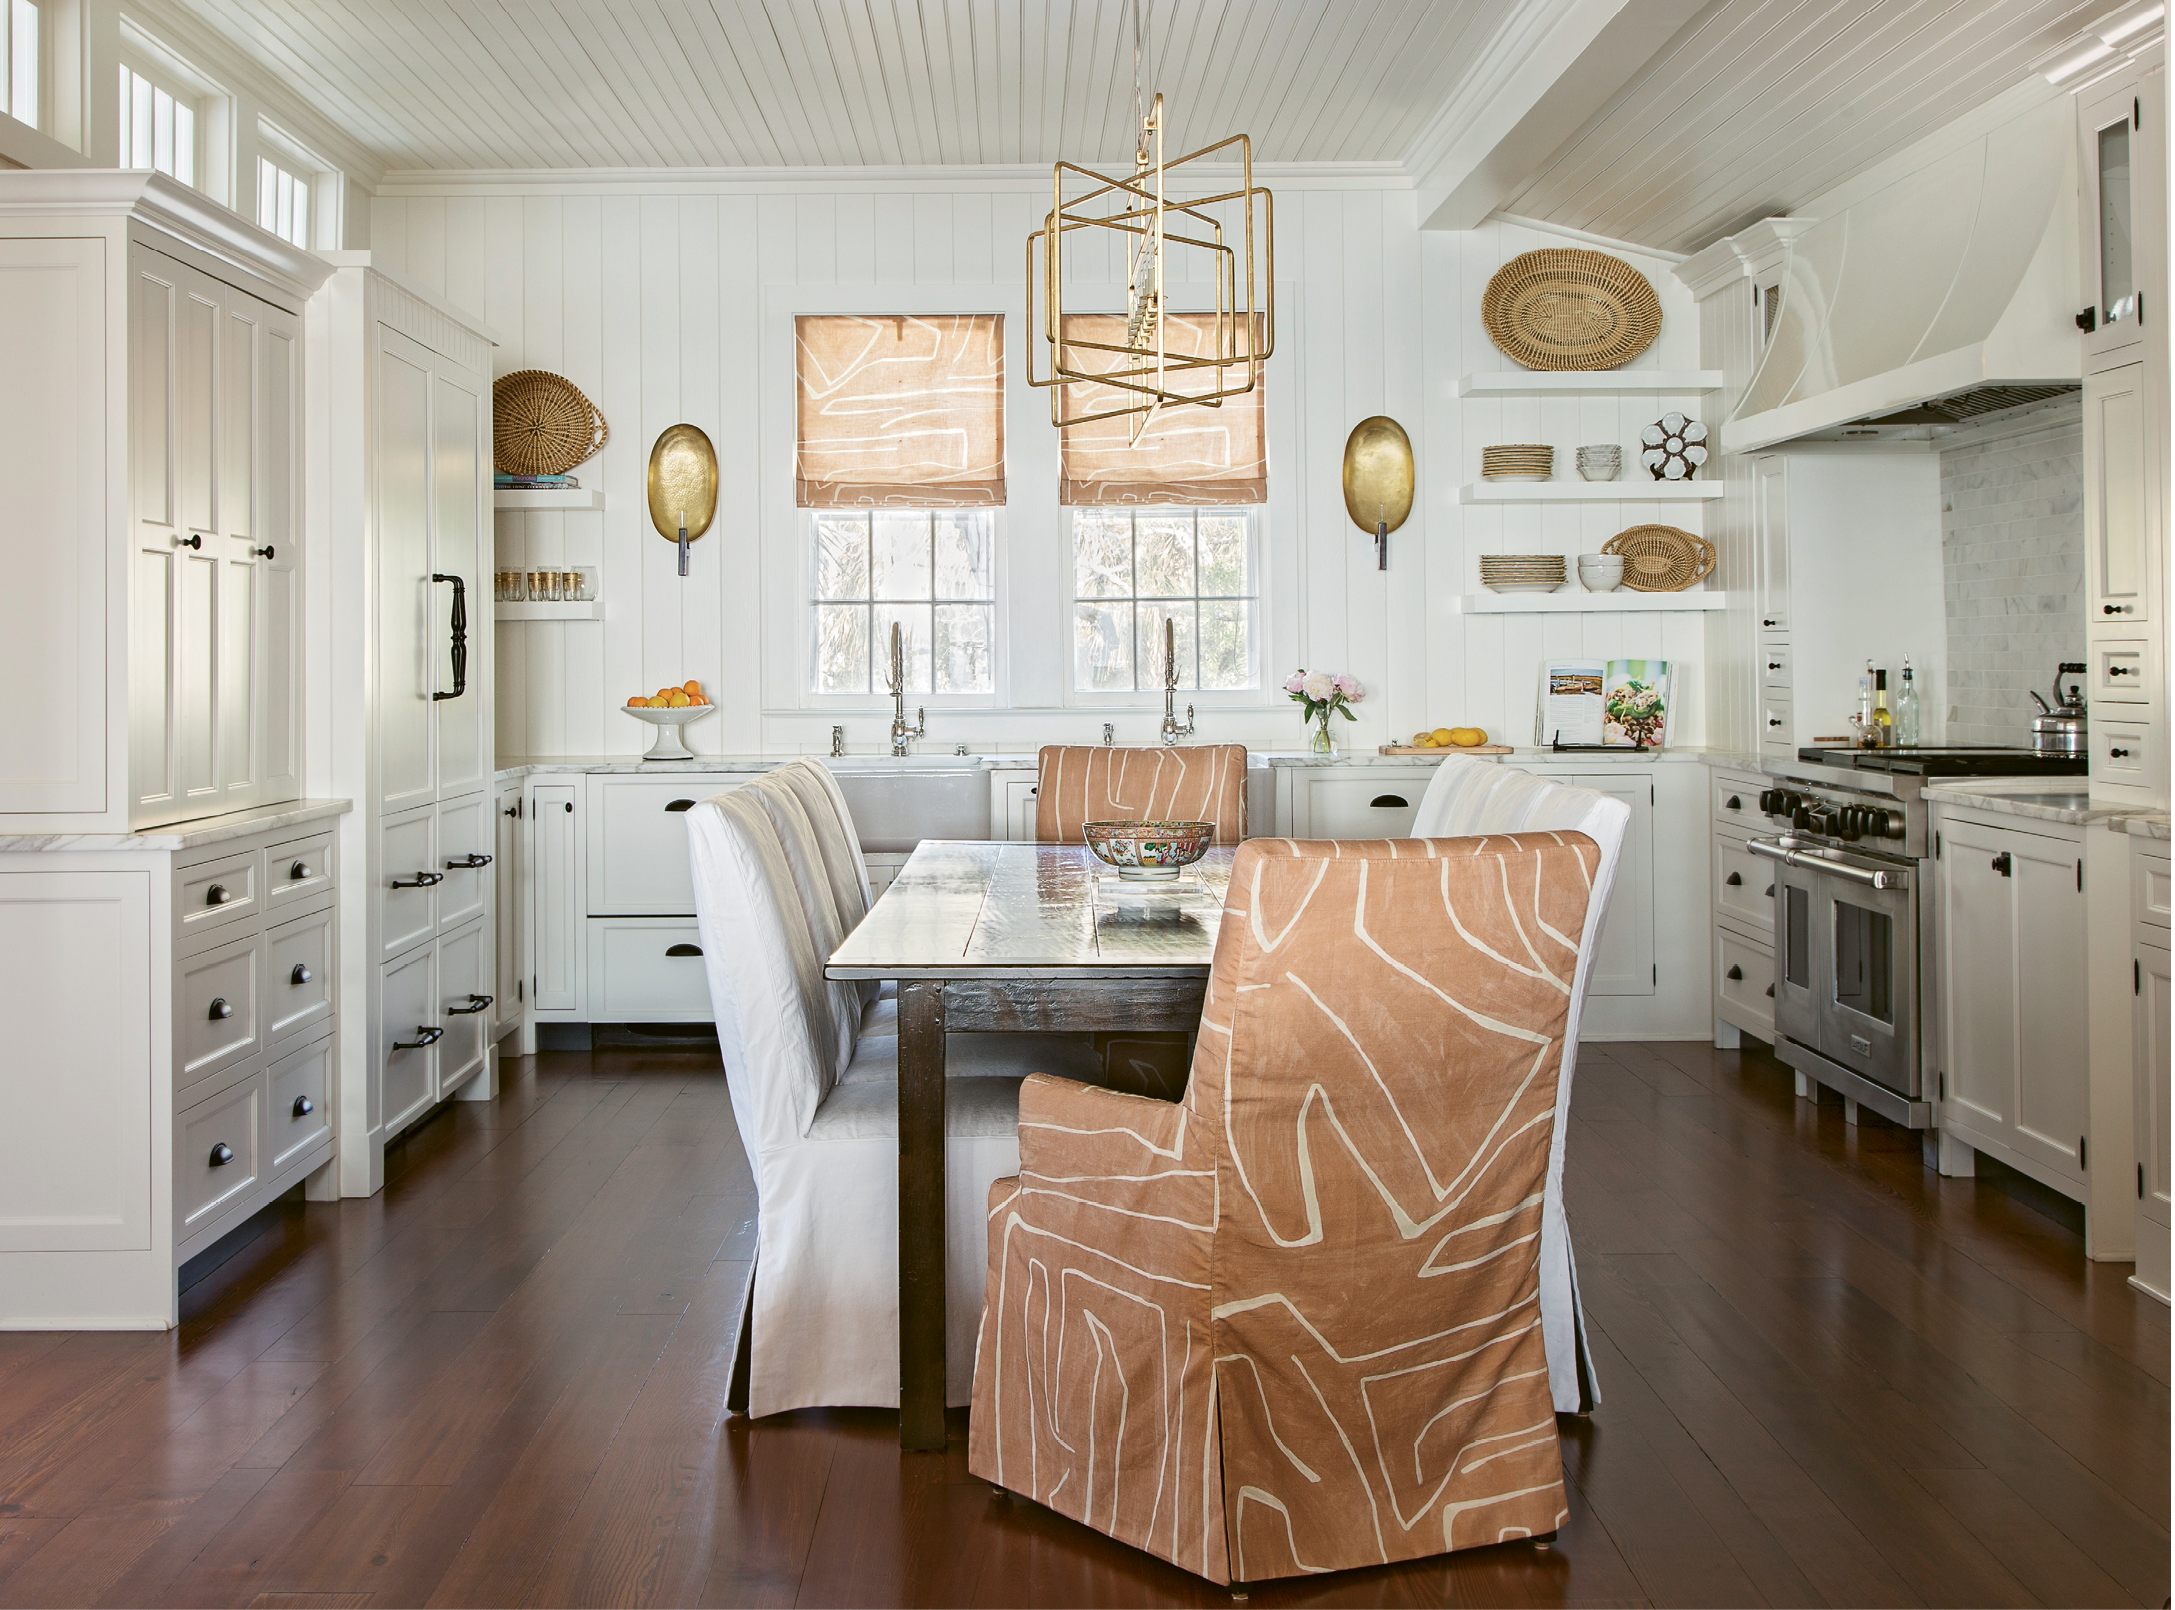 GOLDEN TOUCH: In the kitchen, simple roman shades in an abstract Kelly Wearstler fabric and clean-lined open shelving are offset by dramatic hammered-gold sconces. Instead of an island, the room is anchored by a custom dining table and comfy slip-covered chairs.